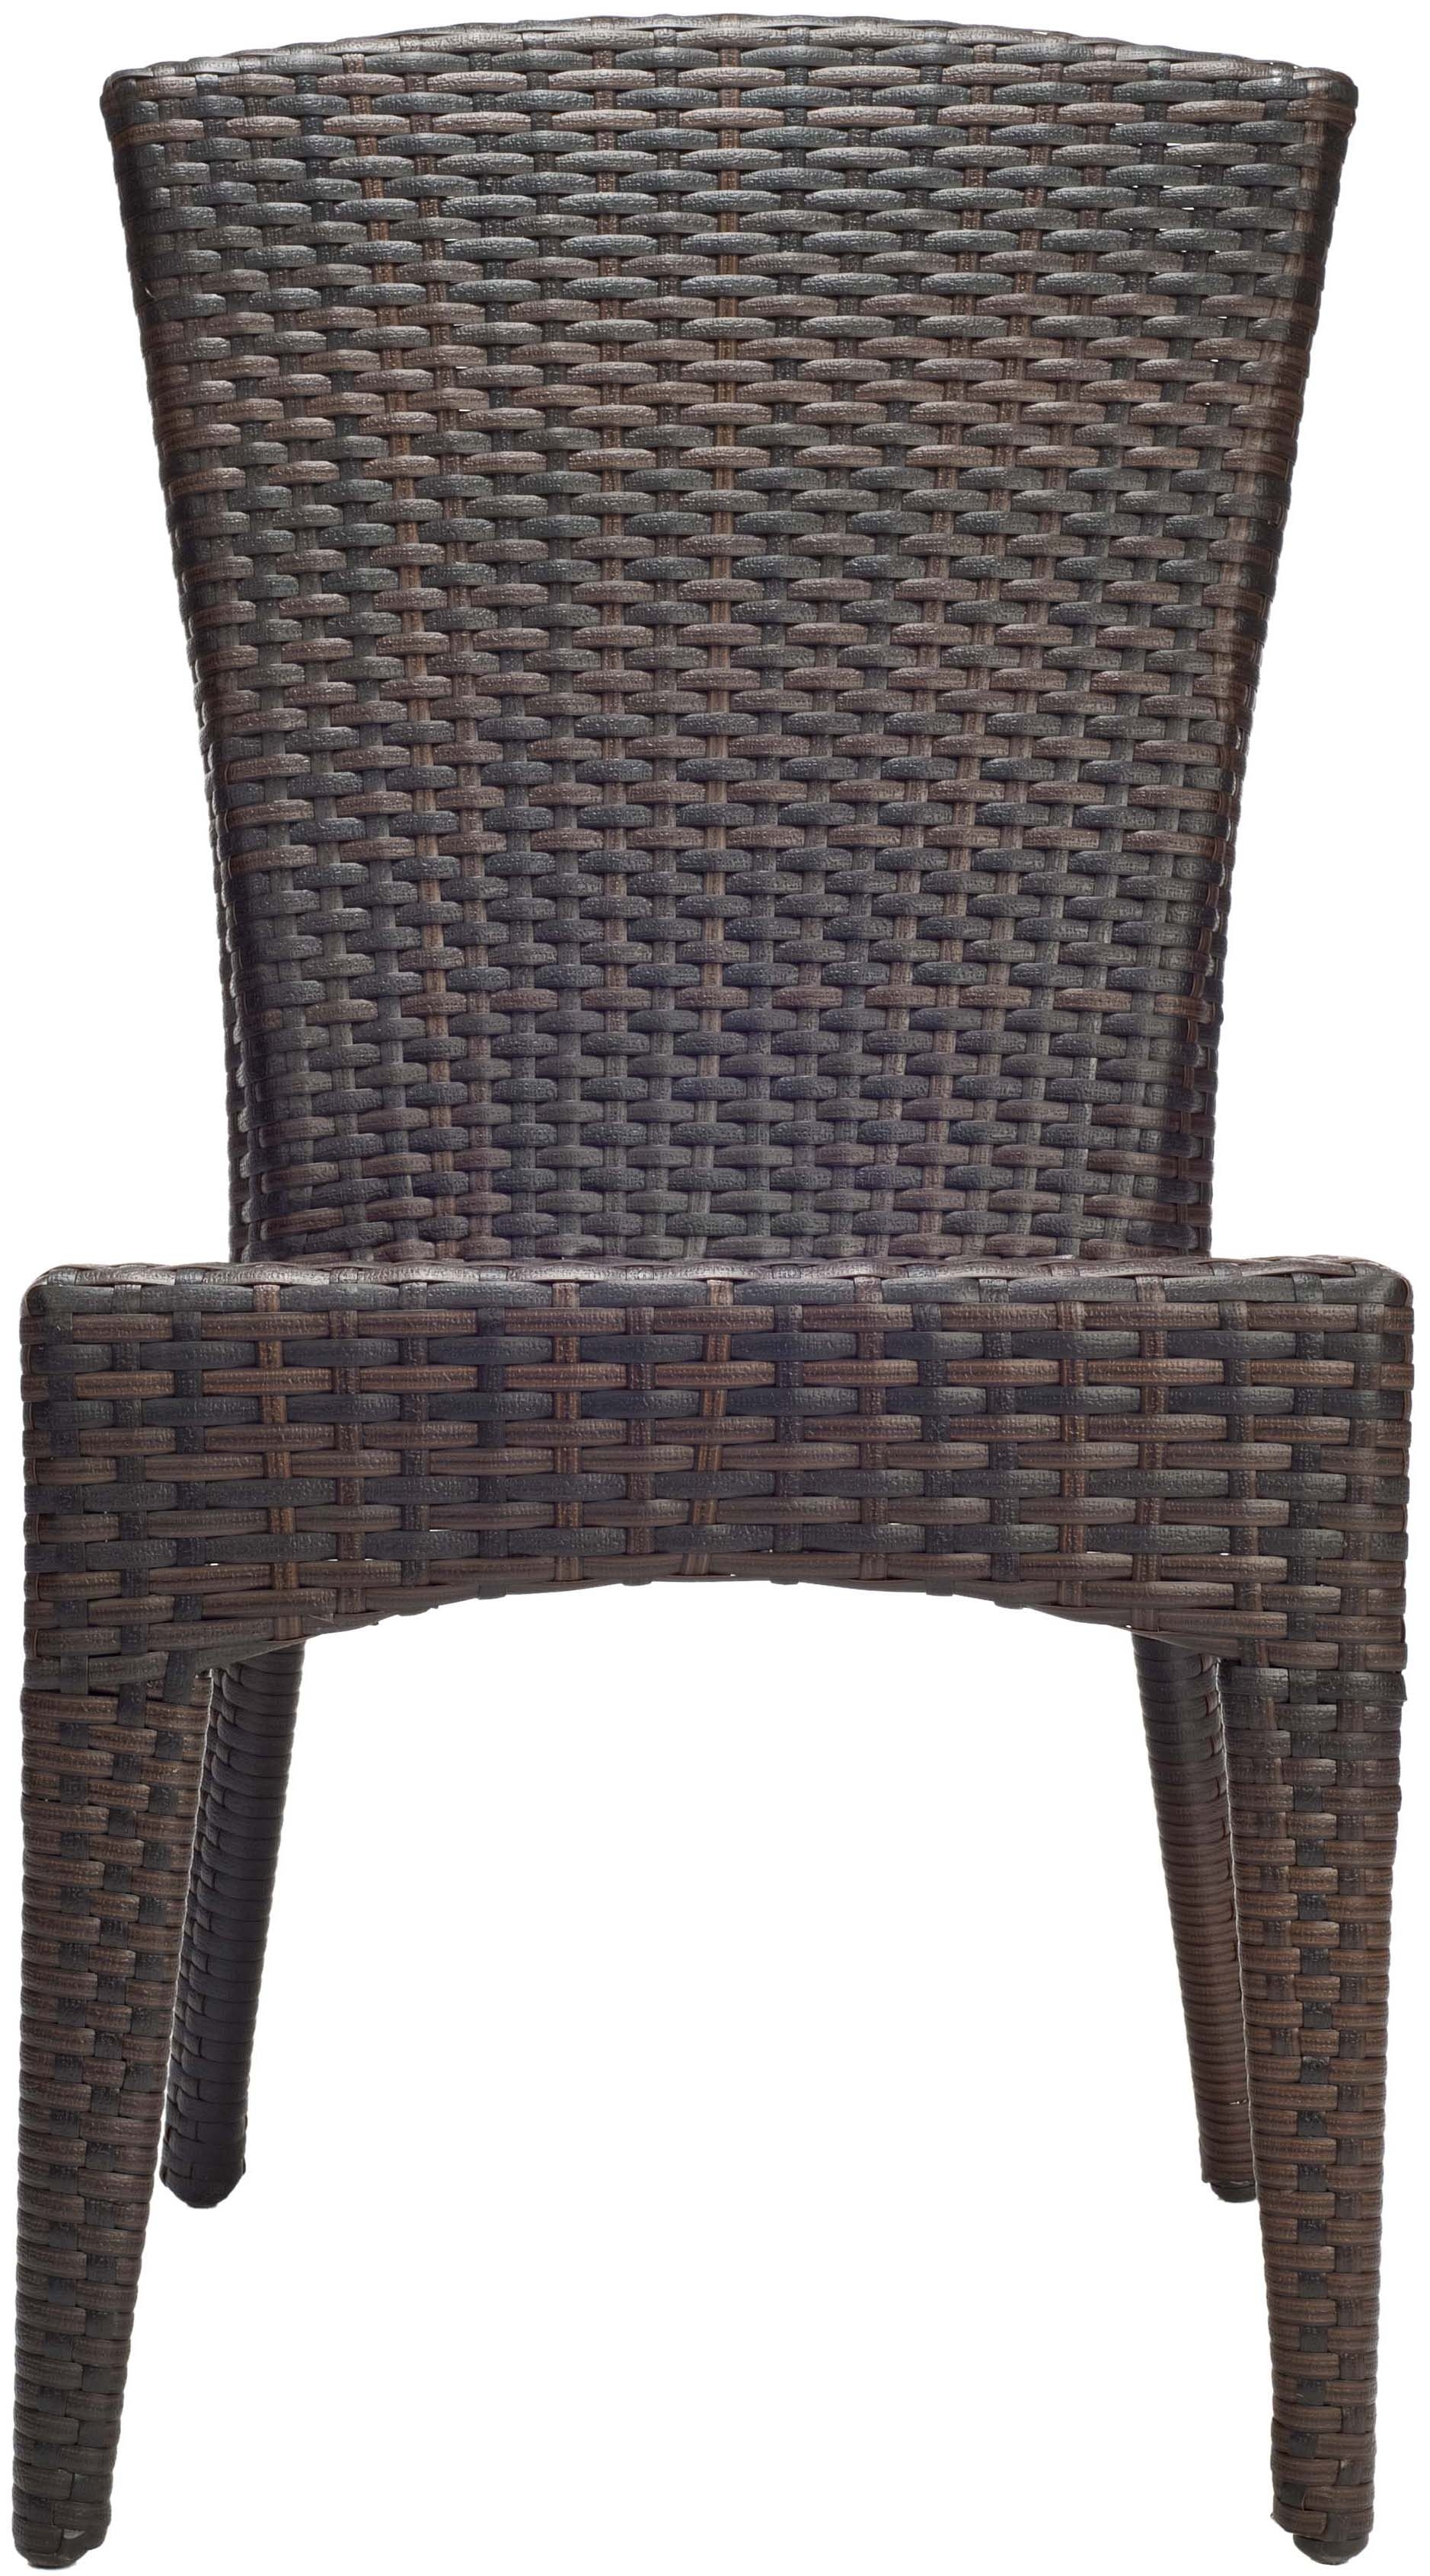 New Castle Wicker Side Chair - Black/Brown - Arlo Home - Image 1